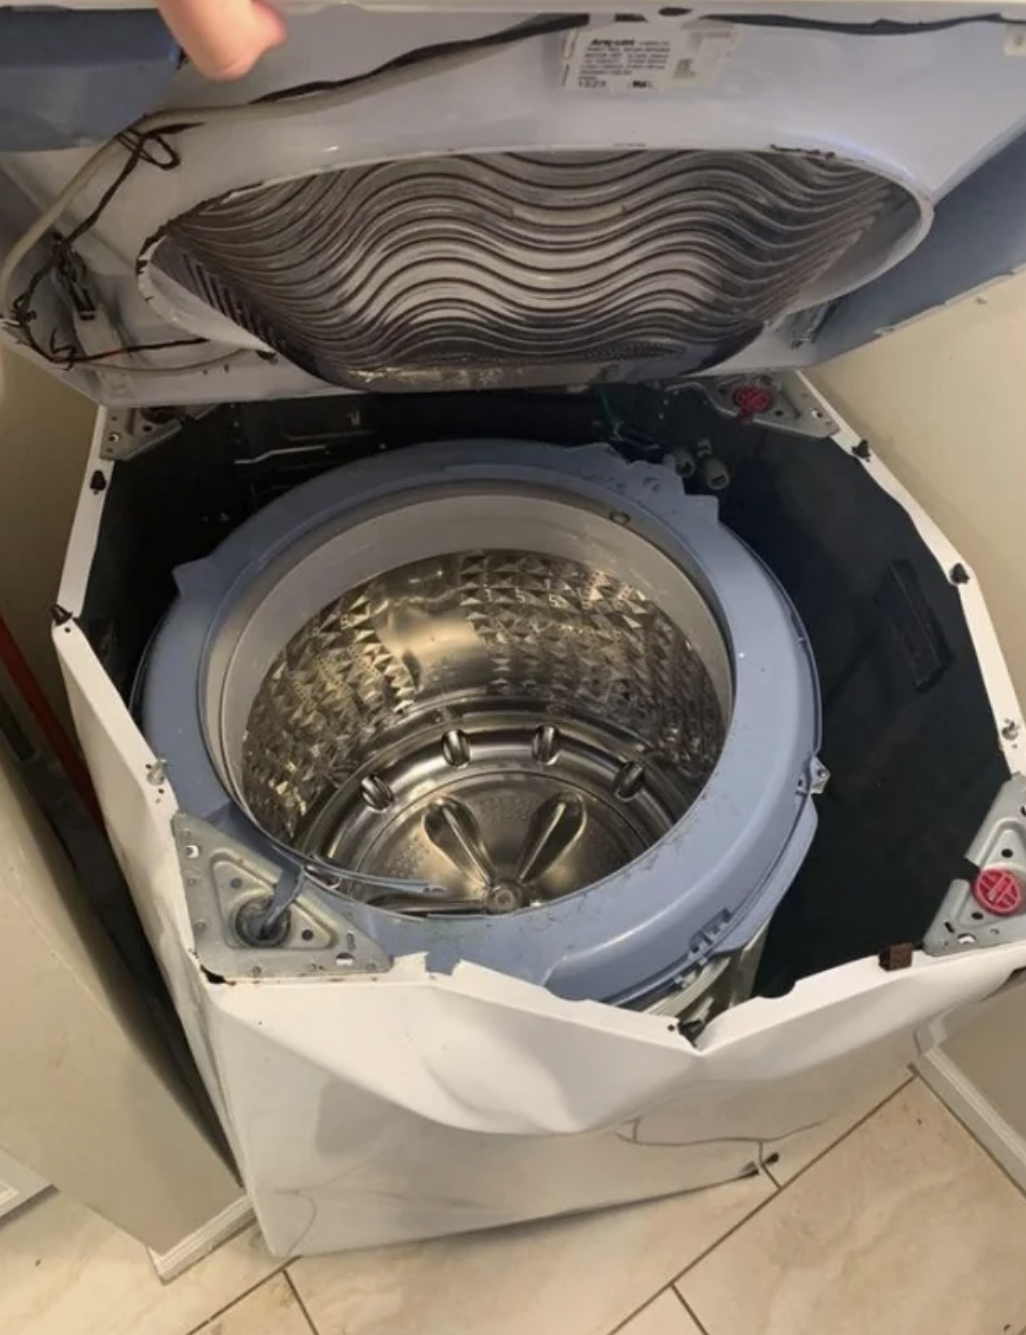 a completely damaged and wrecked washer